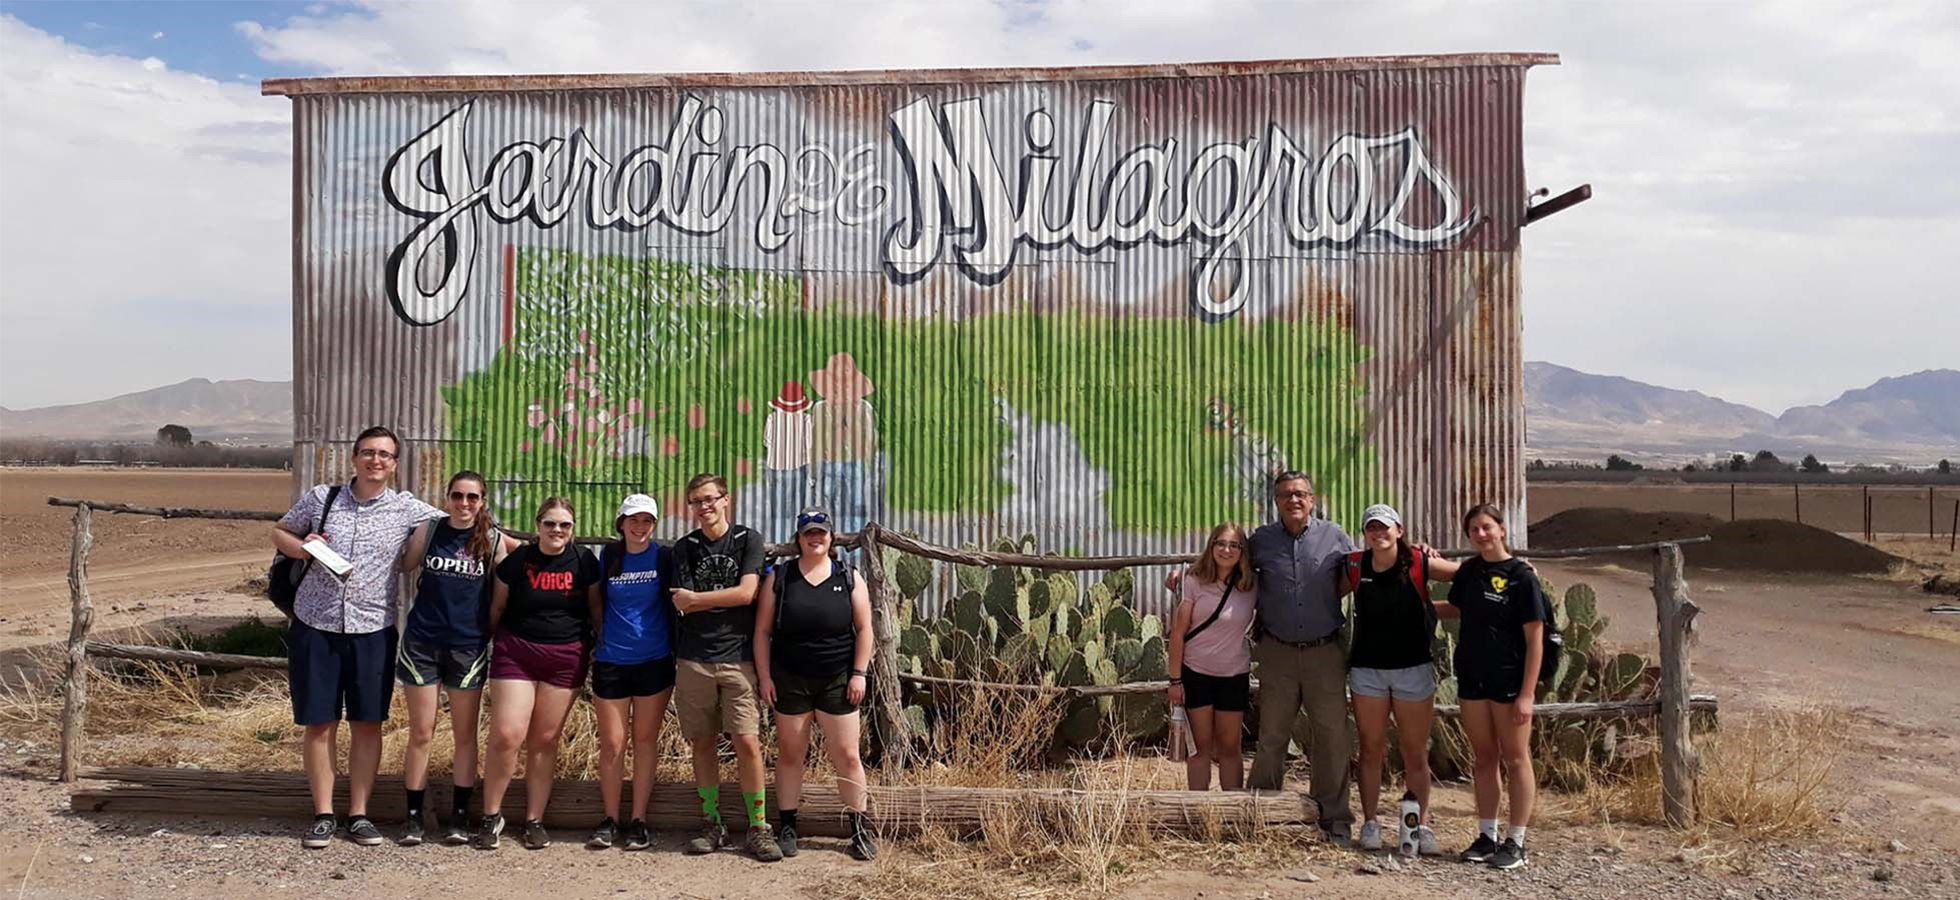 Assumption students in El Paso, Texas where they were engaged in a week of service.